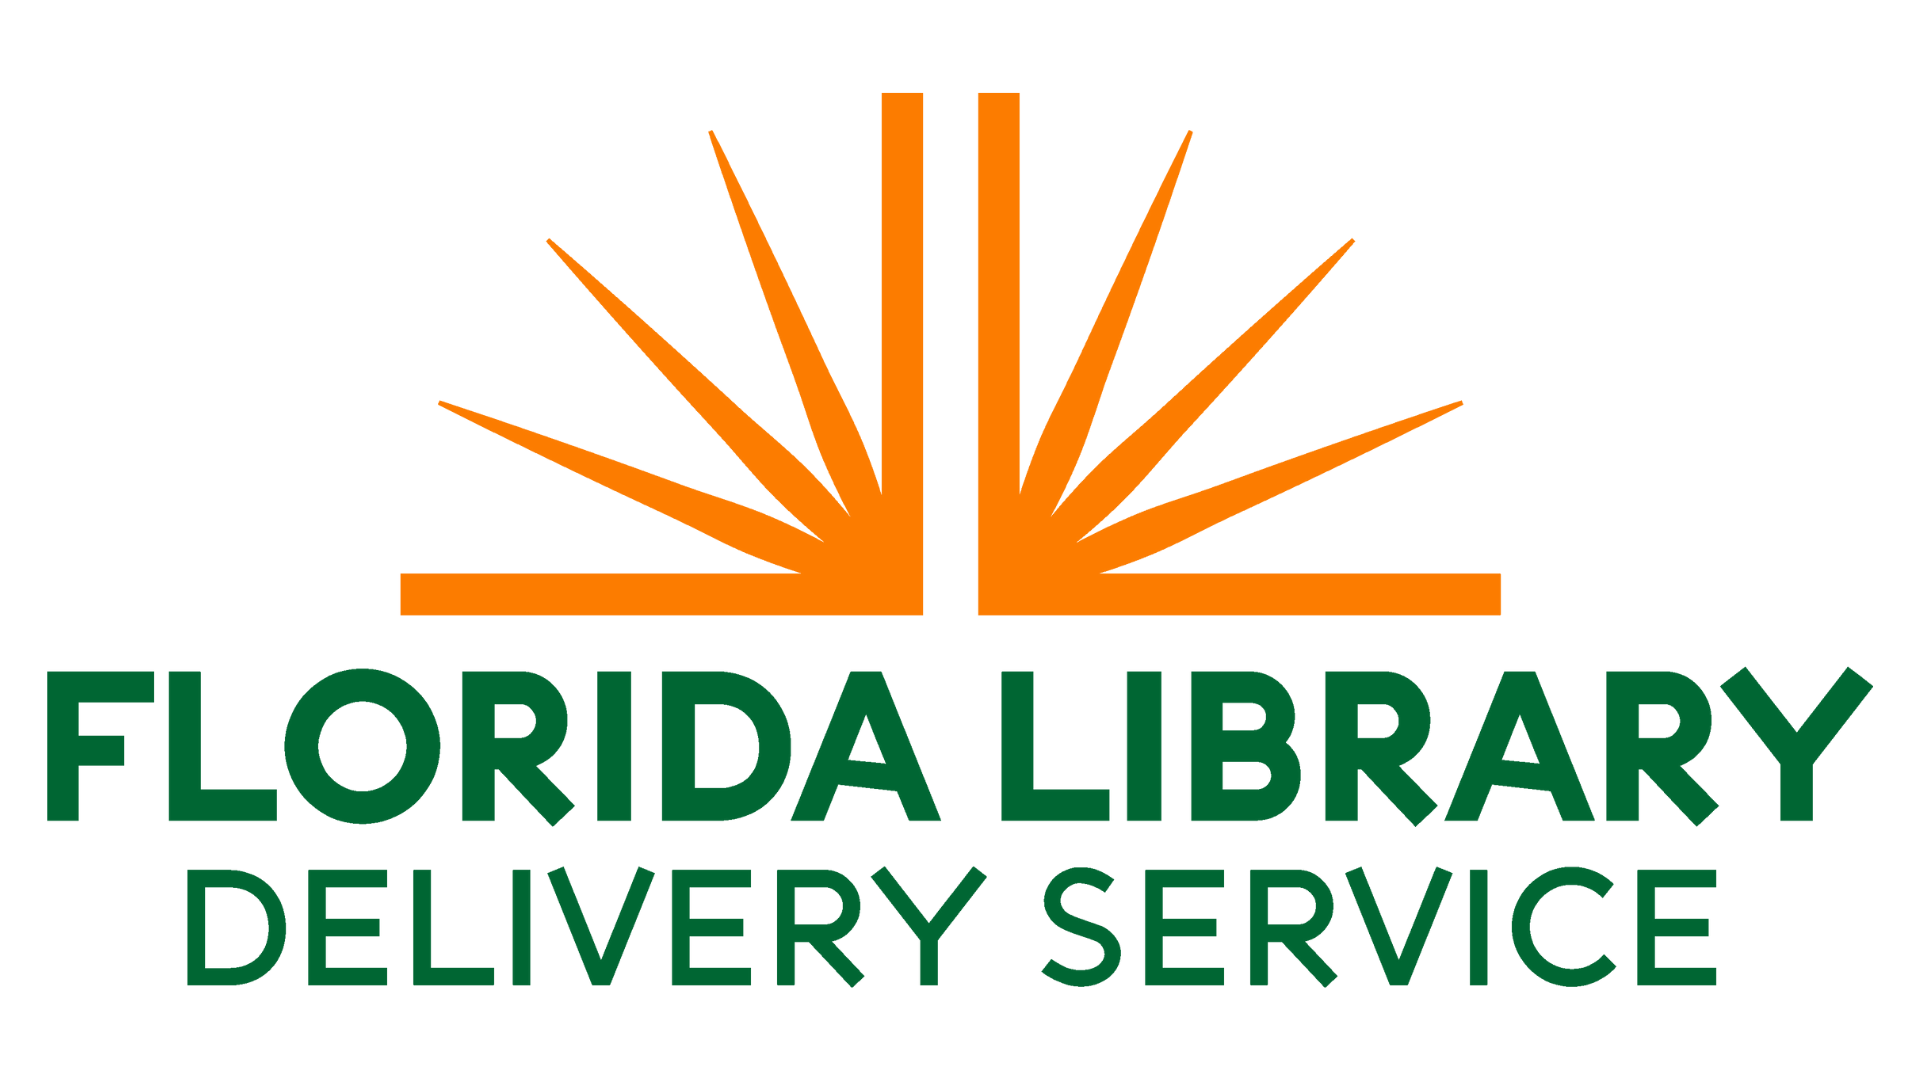 Florida Statewide Delivery Service